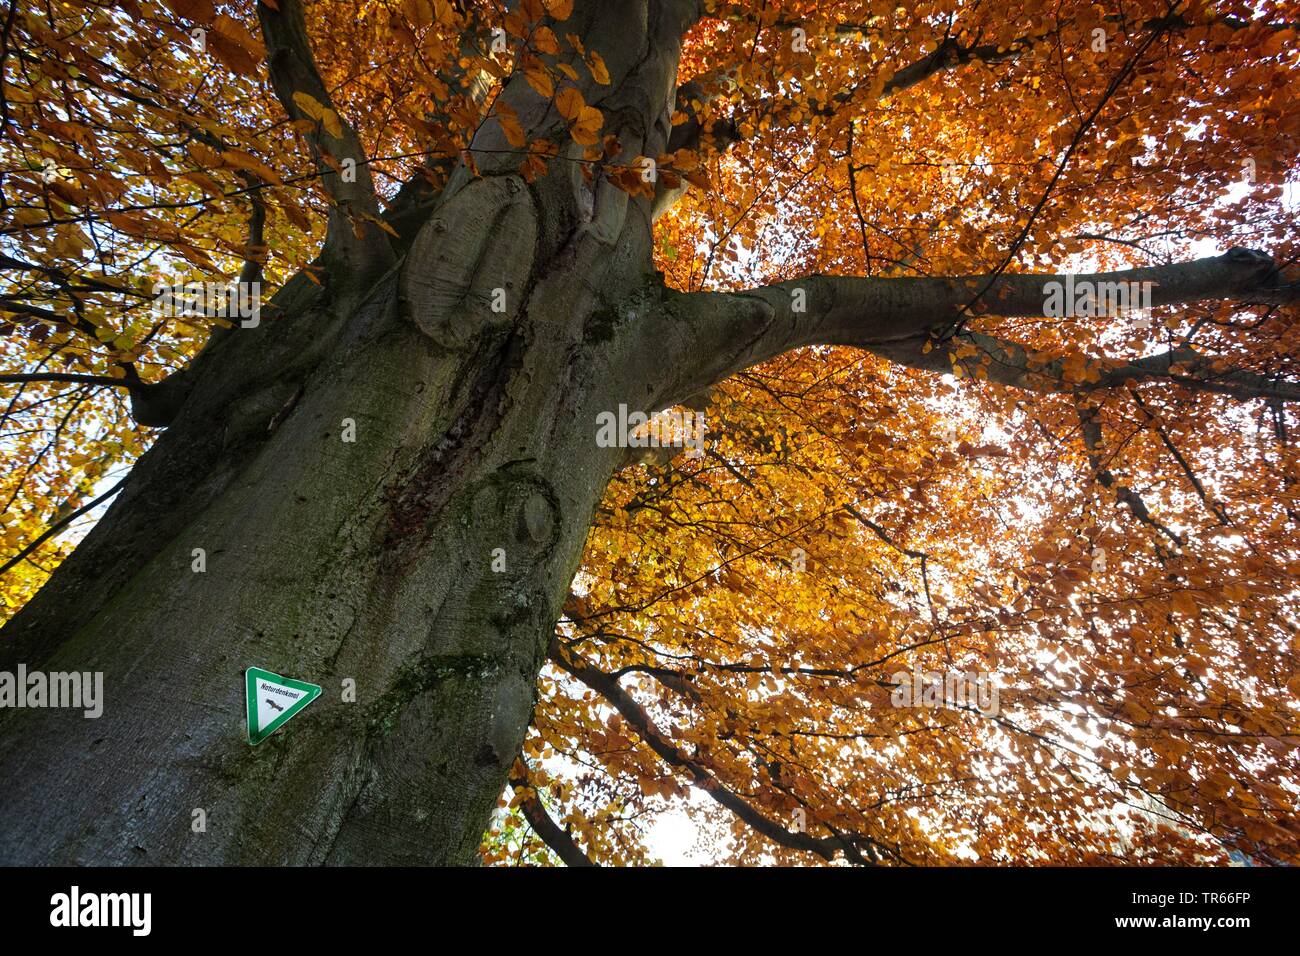 common beech (Fagus sylvatica), old beech with conservation area sign in autumn, detail, Germany, Bavaria Stock Photo